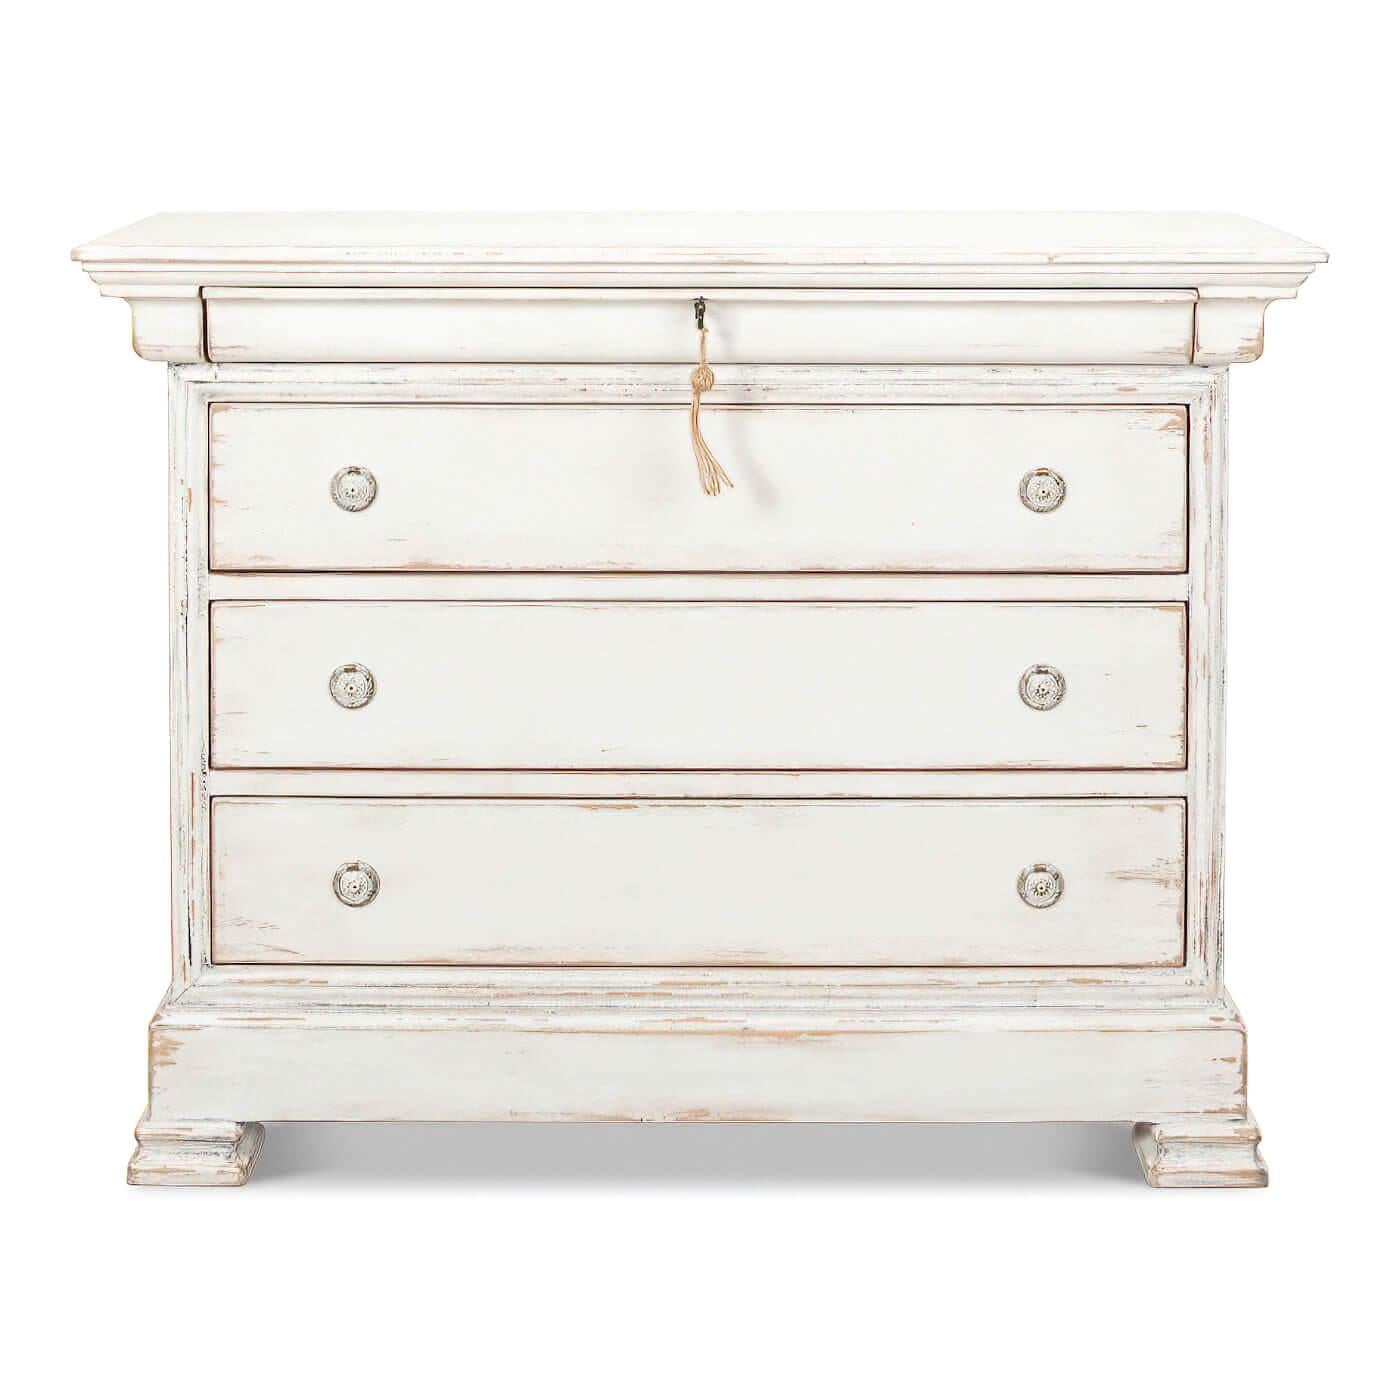 A French Directoire-style commode with an antiqued whitewash finish. This beautiful piece has four drawers with ring pulls, the top drawer is keyed. It's crafted from pine and has an architectural influence with its semblance of crown and base